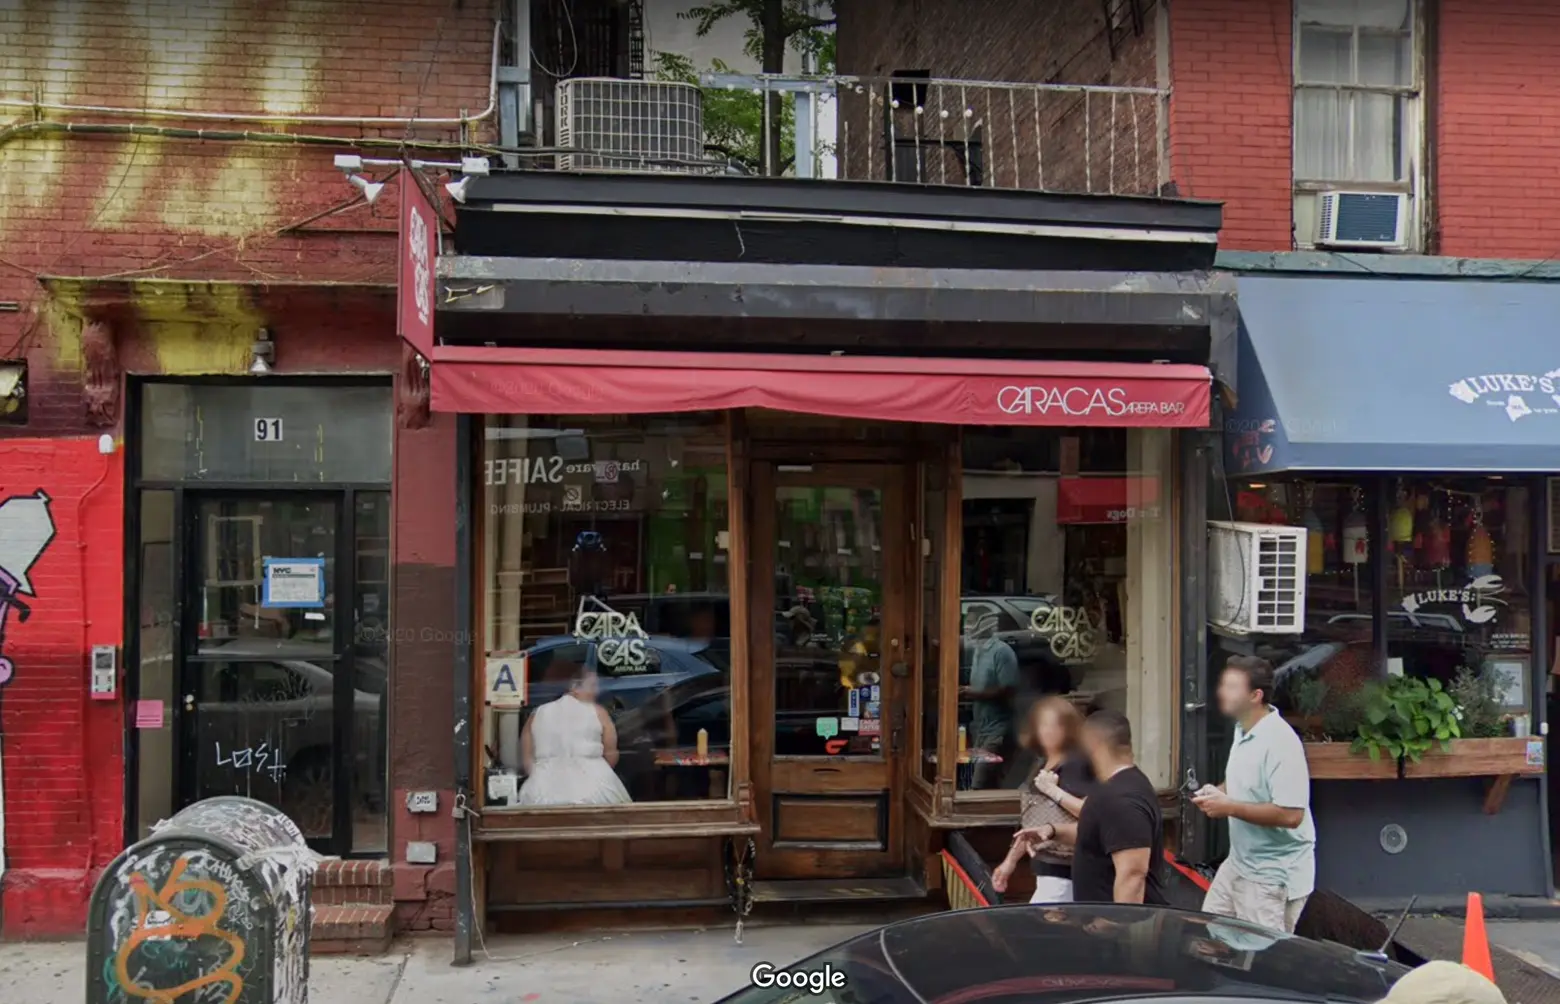 After 17 years, Caracas Arepa Bar is closing in the East Village